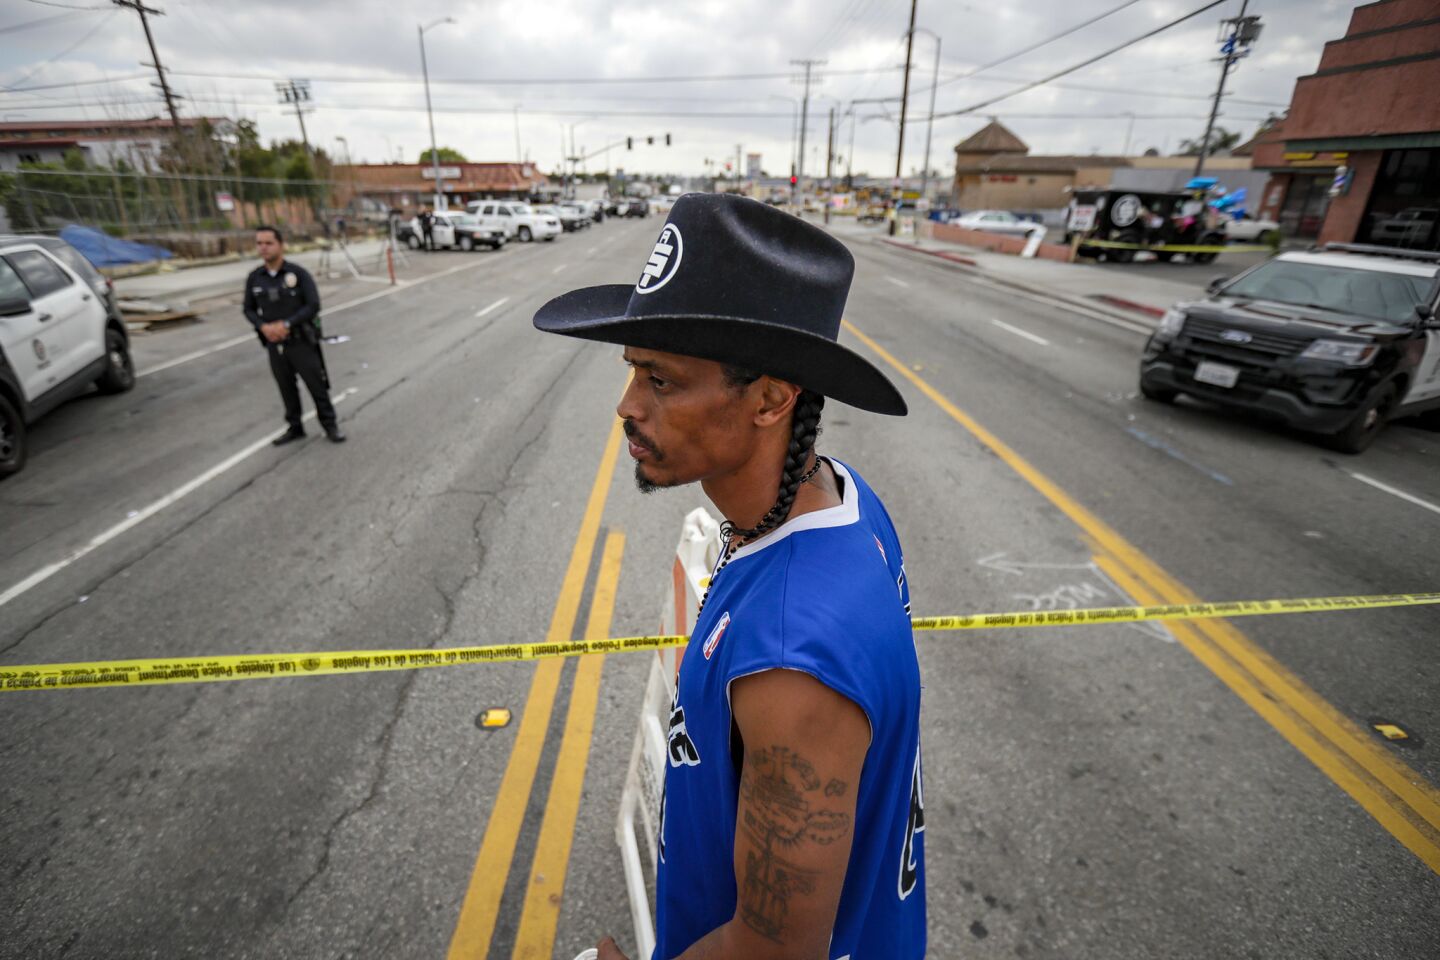 Herman Douglas, a.k.a. Cowboy, a business partner of Nipsey Hussle, stands behind police tape marking the crime scene as he pays his respect at a makeshift memorial for Hussle on April 2.